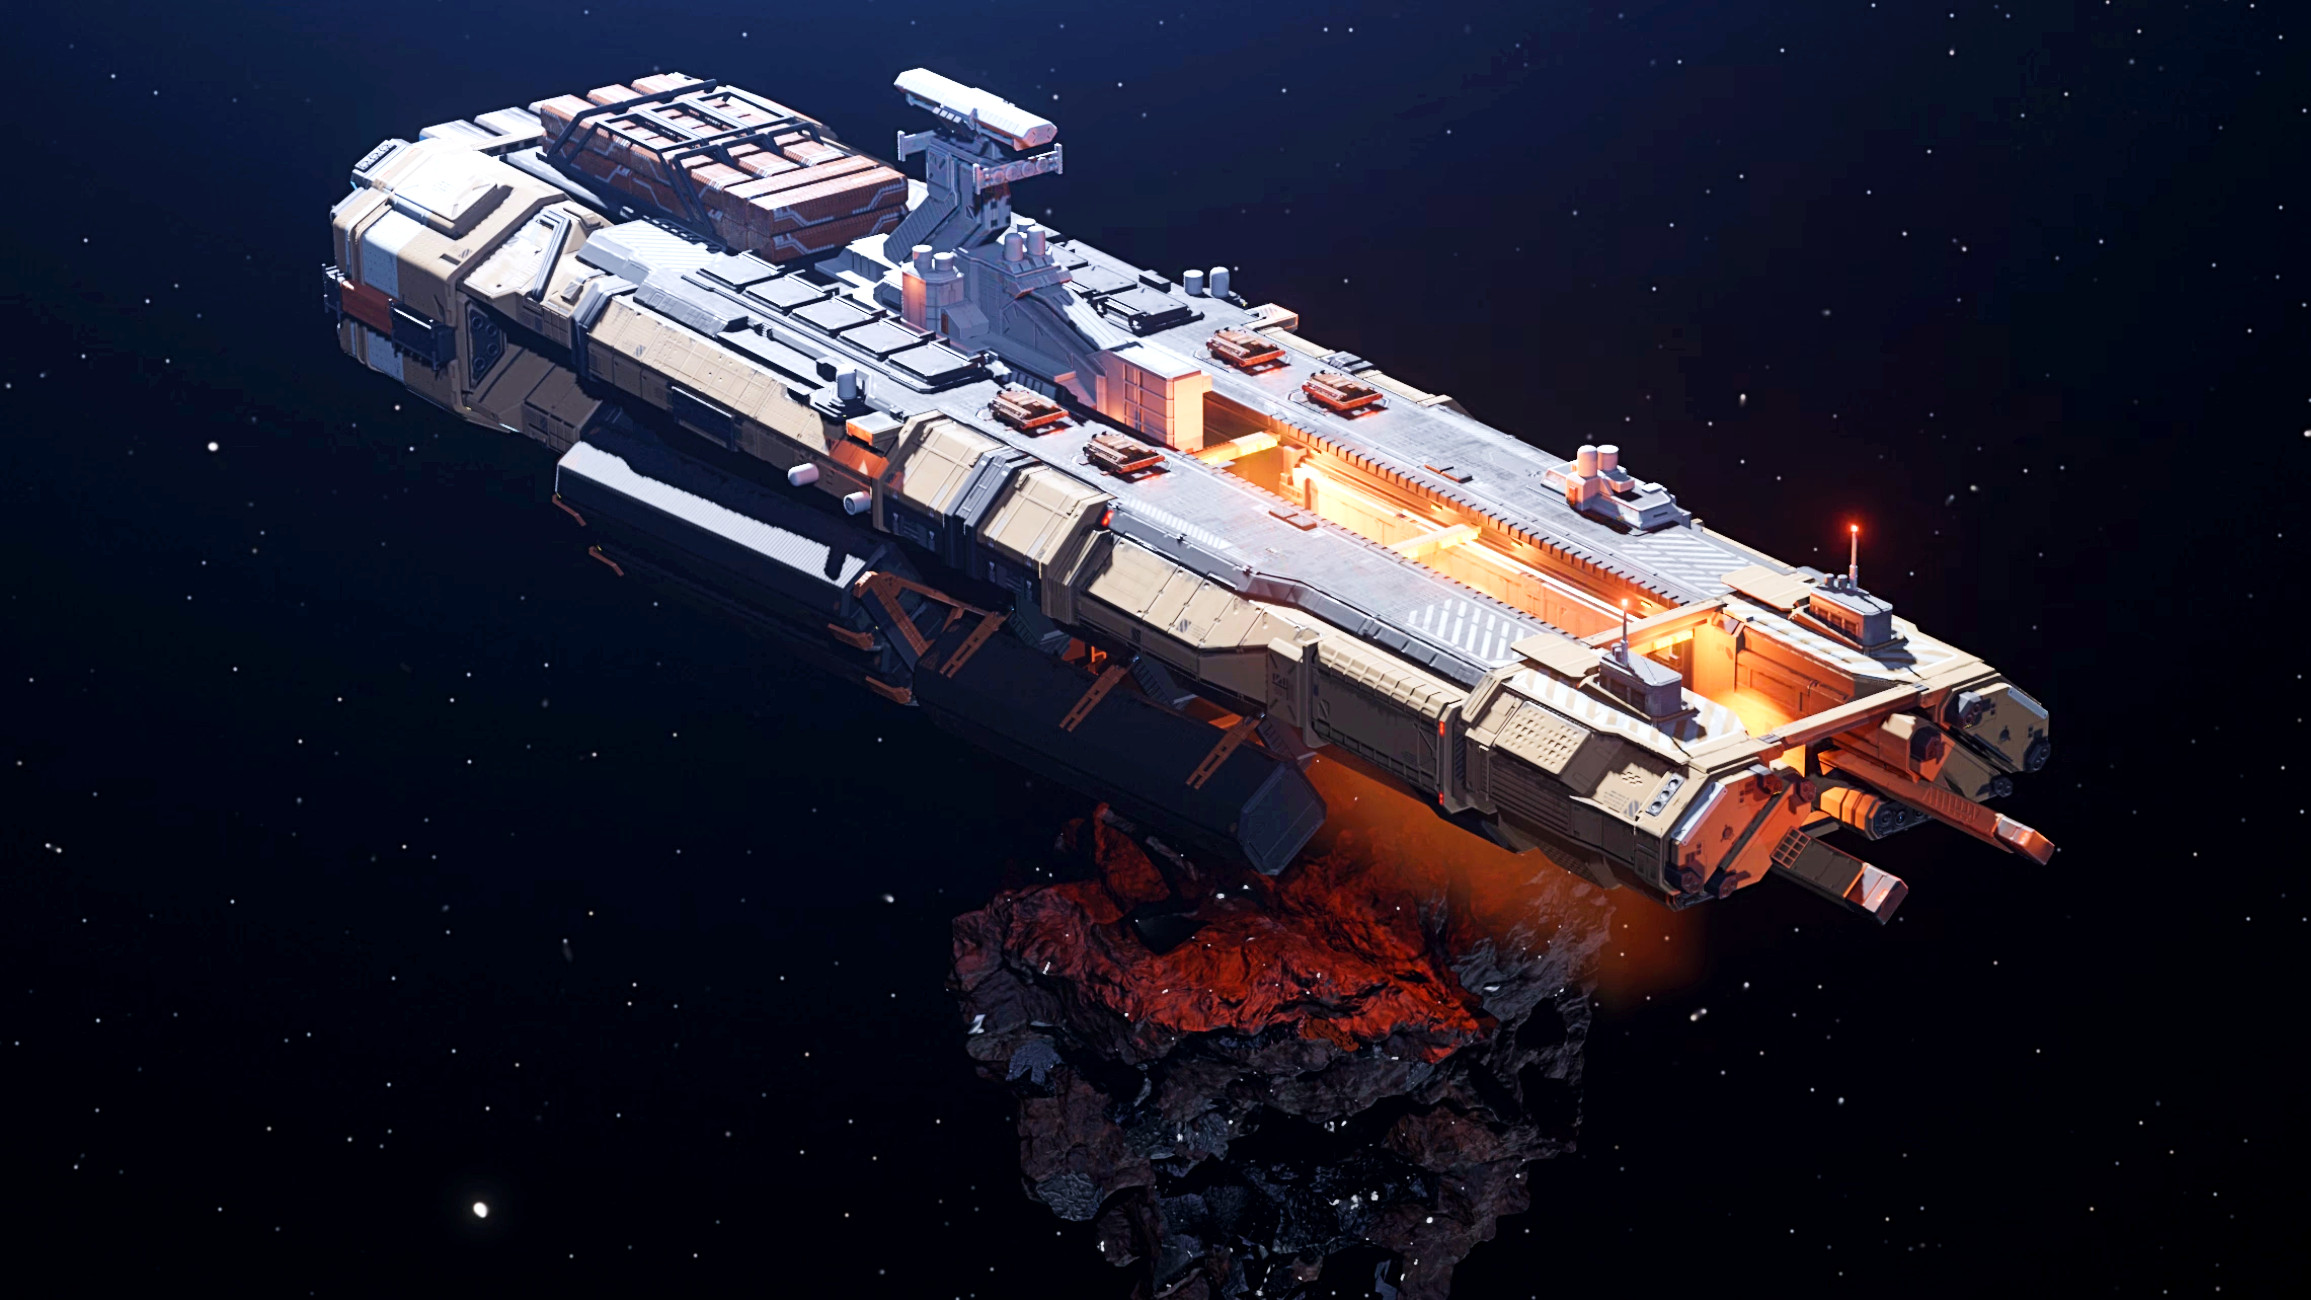 Hotly anticipated Steam space RTS game unveils stunning new ships